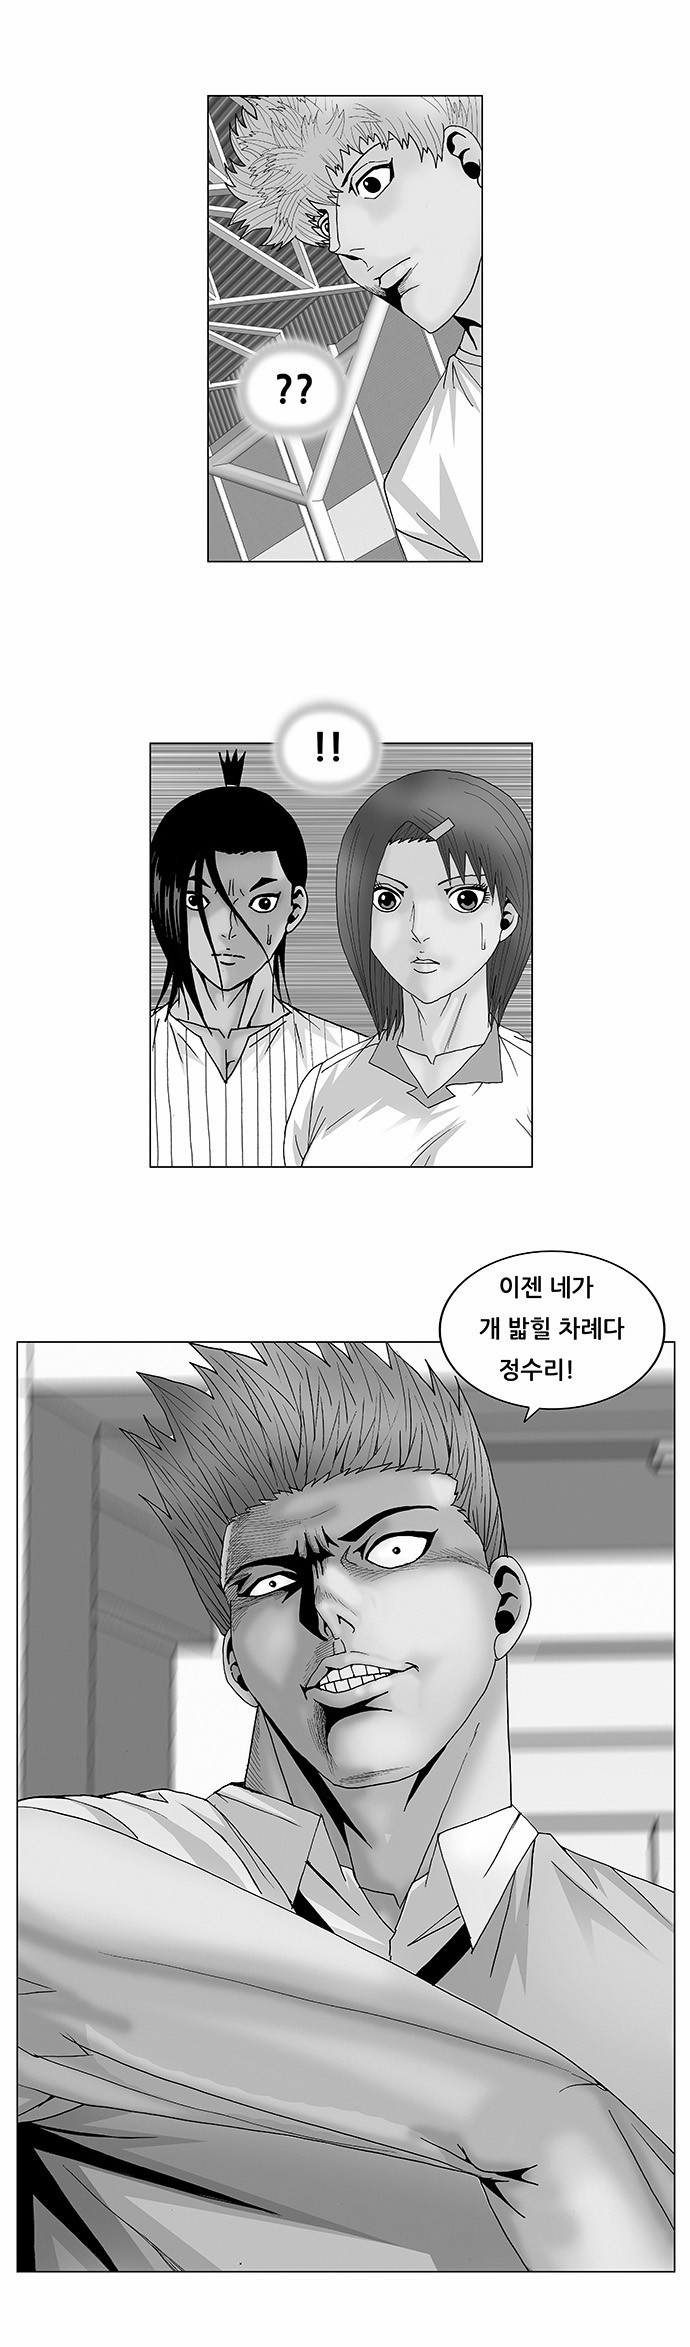 Ultimate Legend - Kang Hae Hyo - Chapter 110 - Page 2